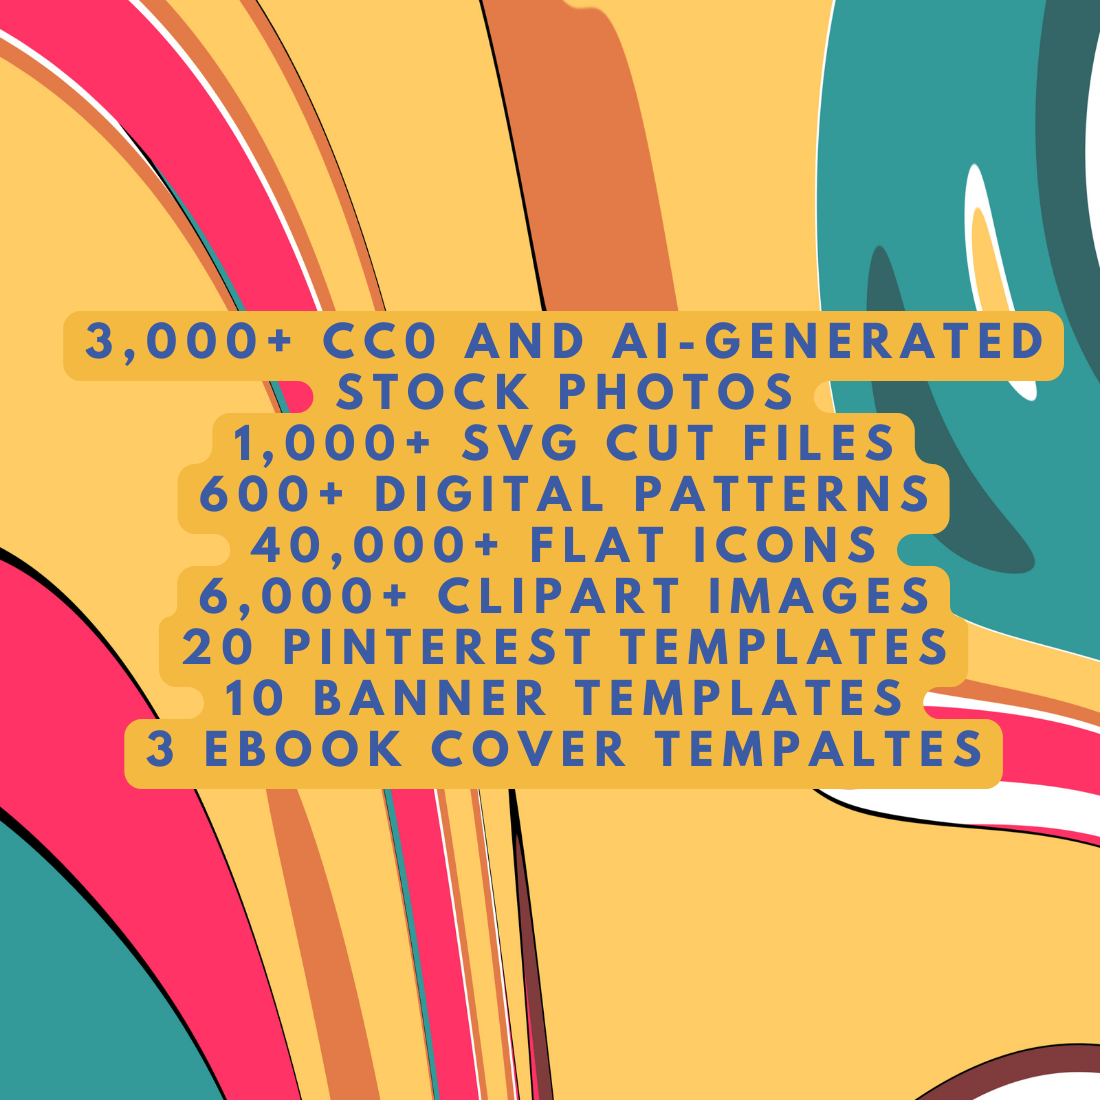 50,000 Graphics! Stock Photos, SVG, Digital Patterns, Clipart, Icons and Templates! preview image.